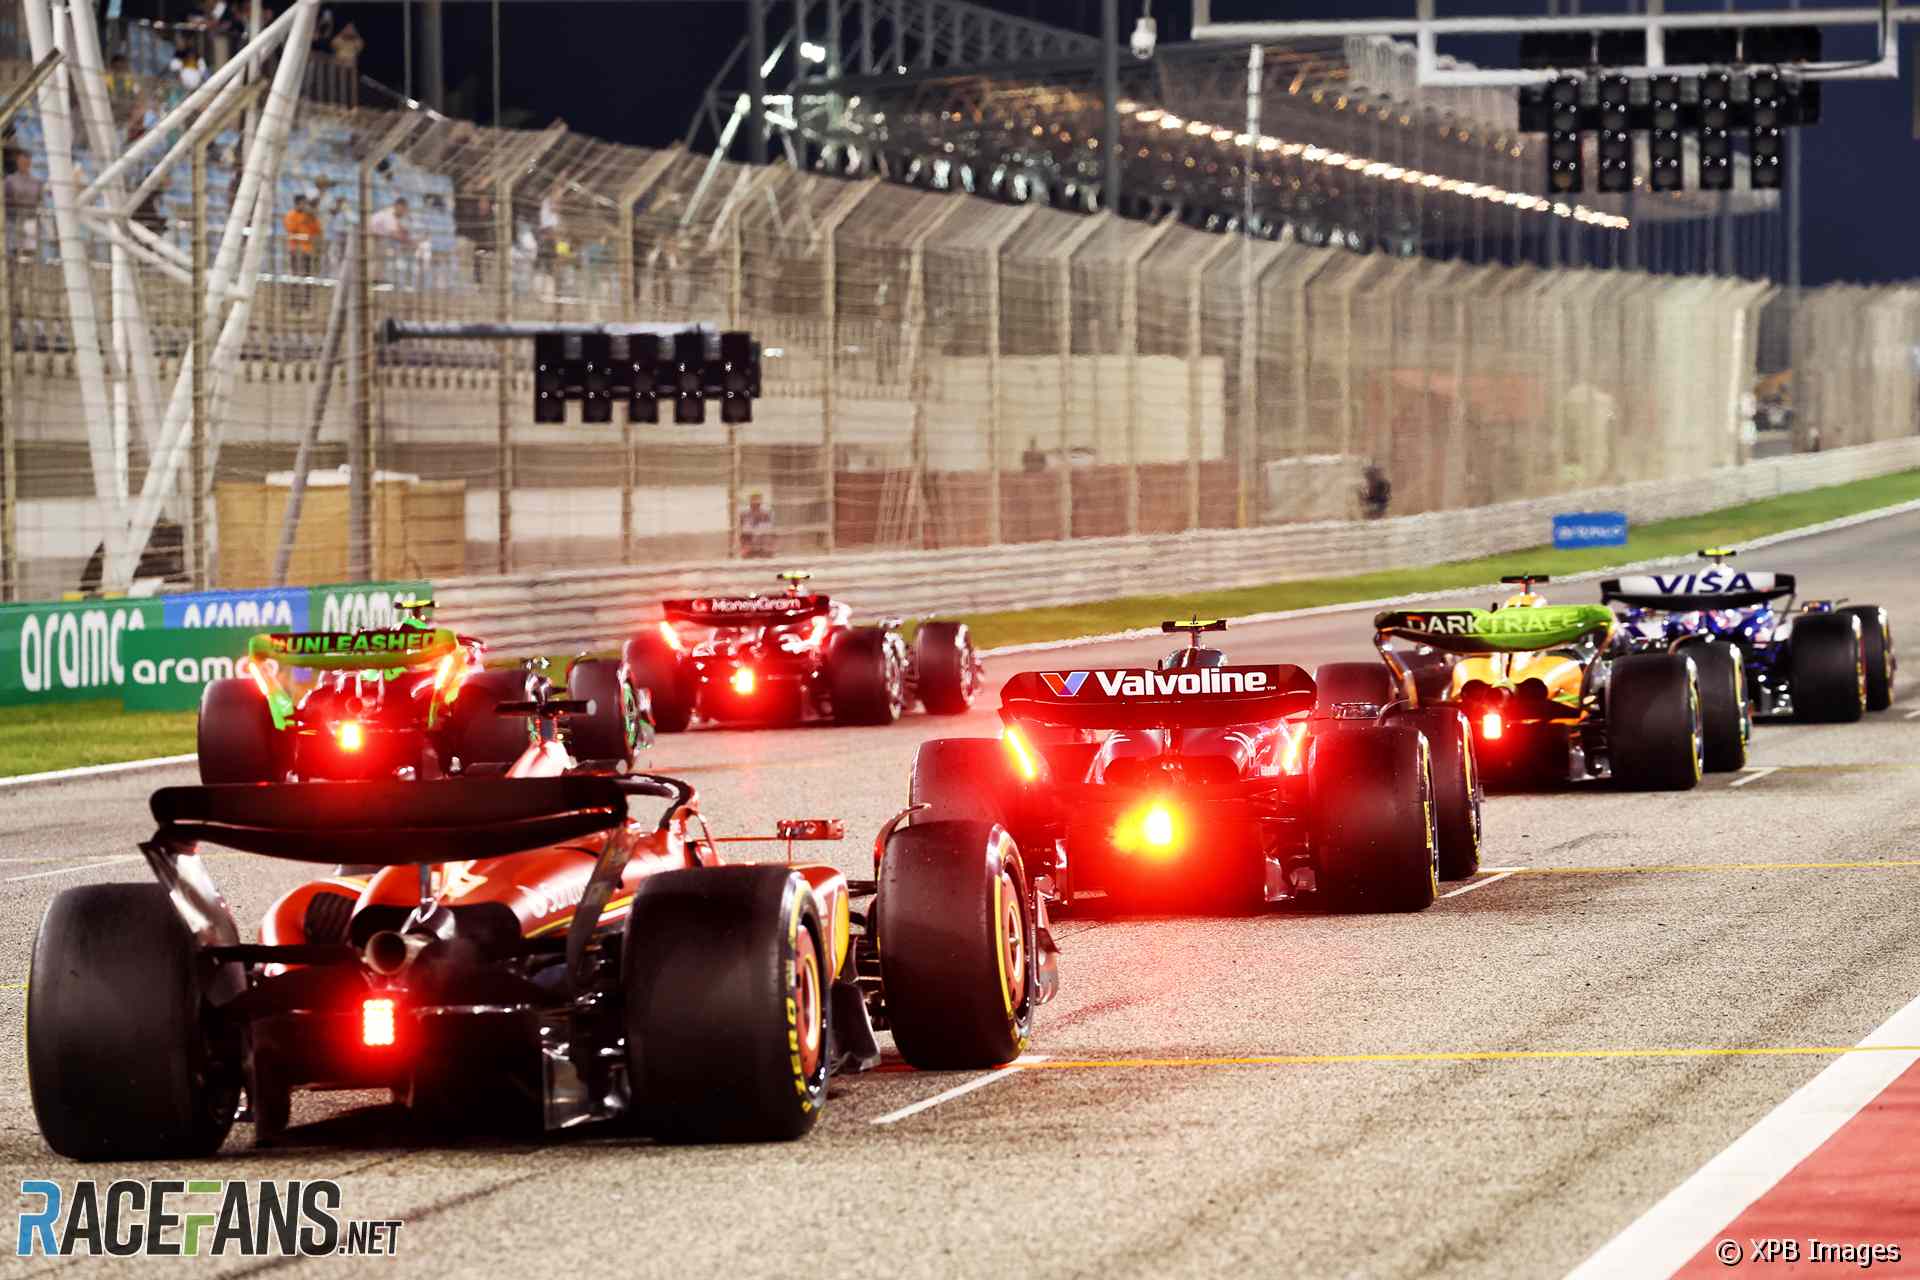 F1's 2026 cars will have 1,000 horsepower, less downforce and weight - Symonds | Formula 1